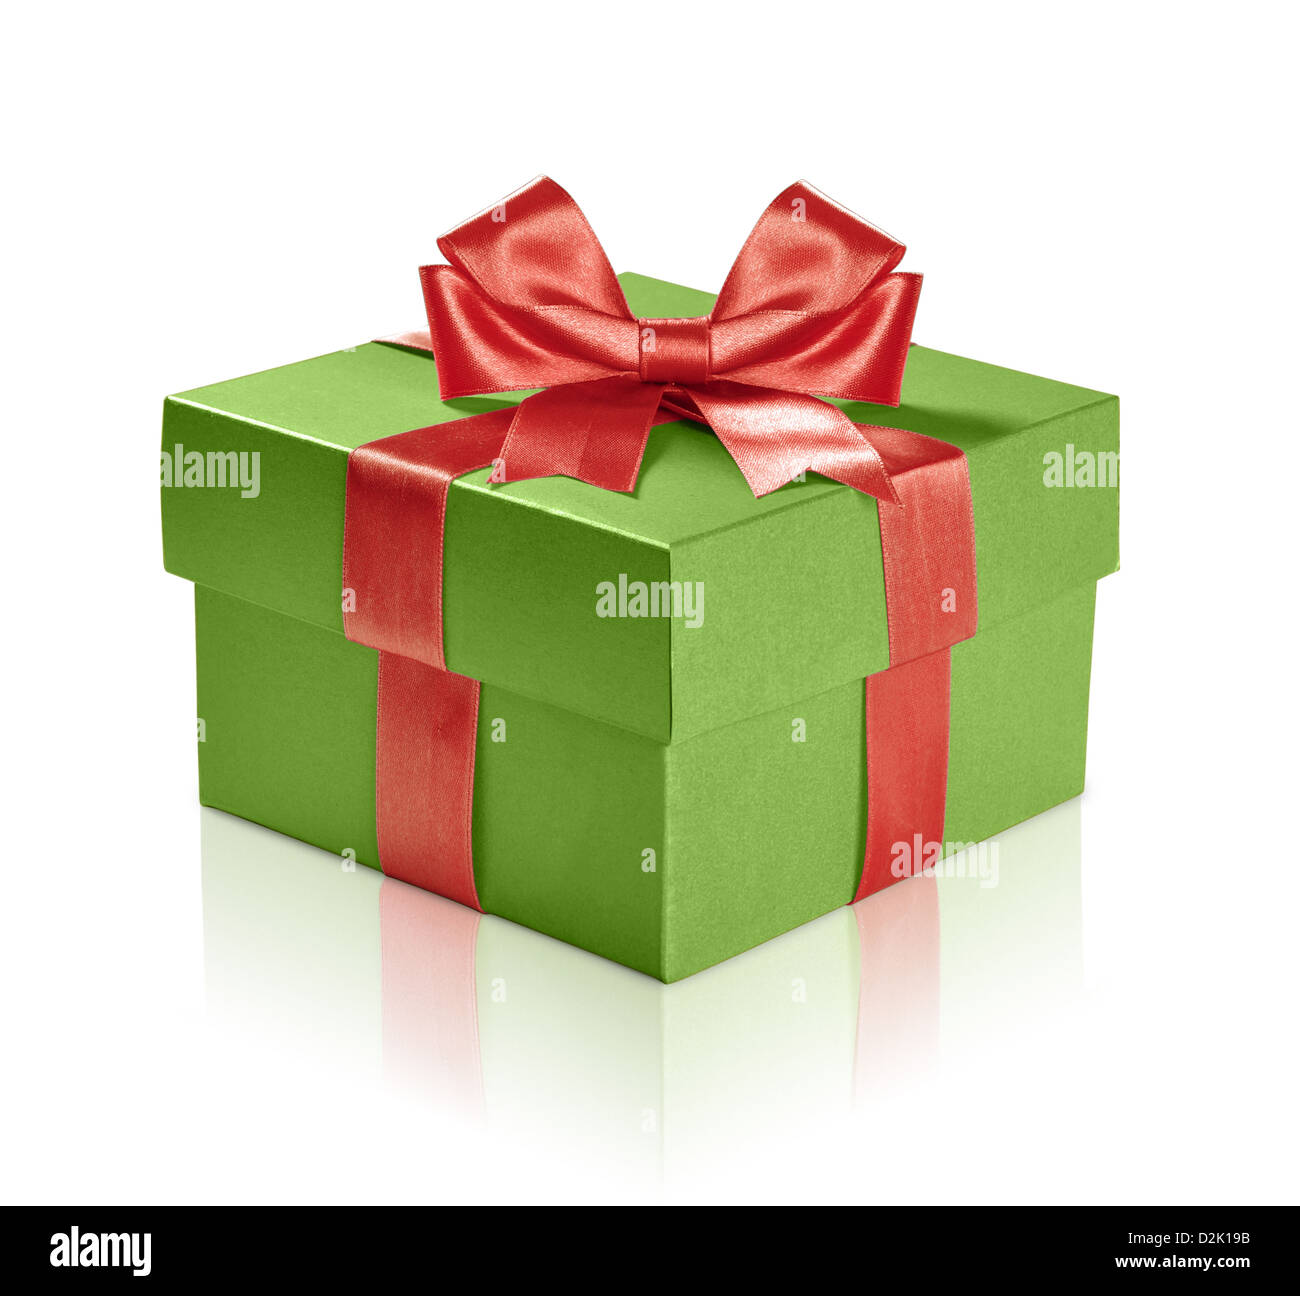 Green gift box with red ribbon over white background. Clipping path included. Stock Photo